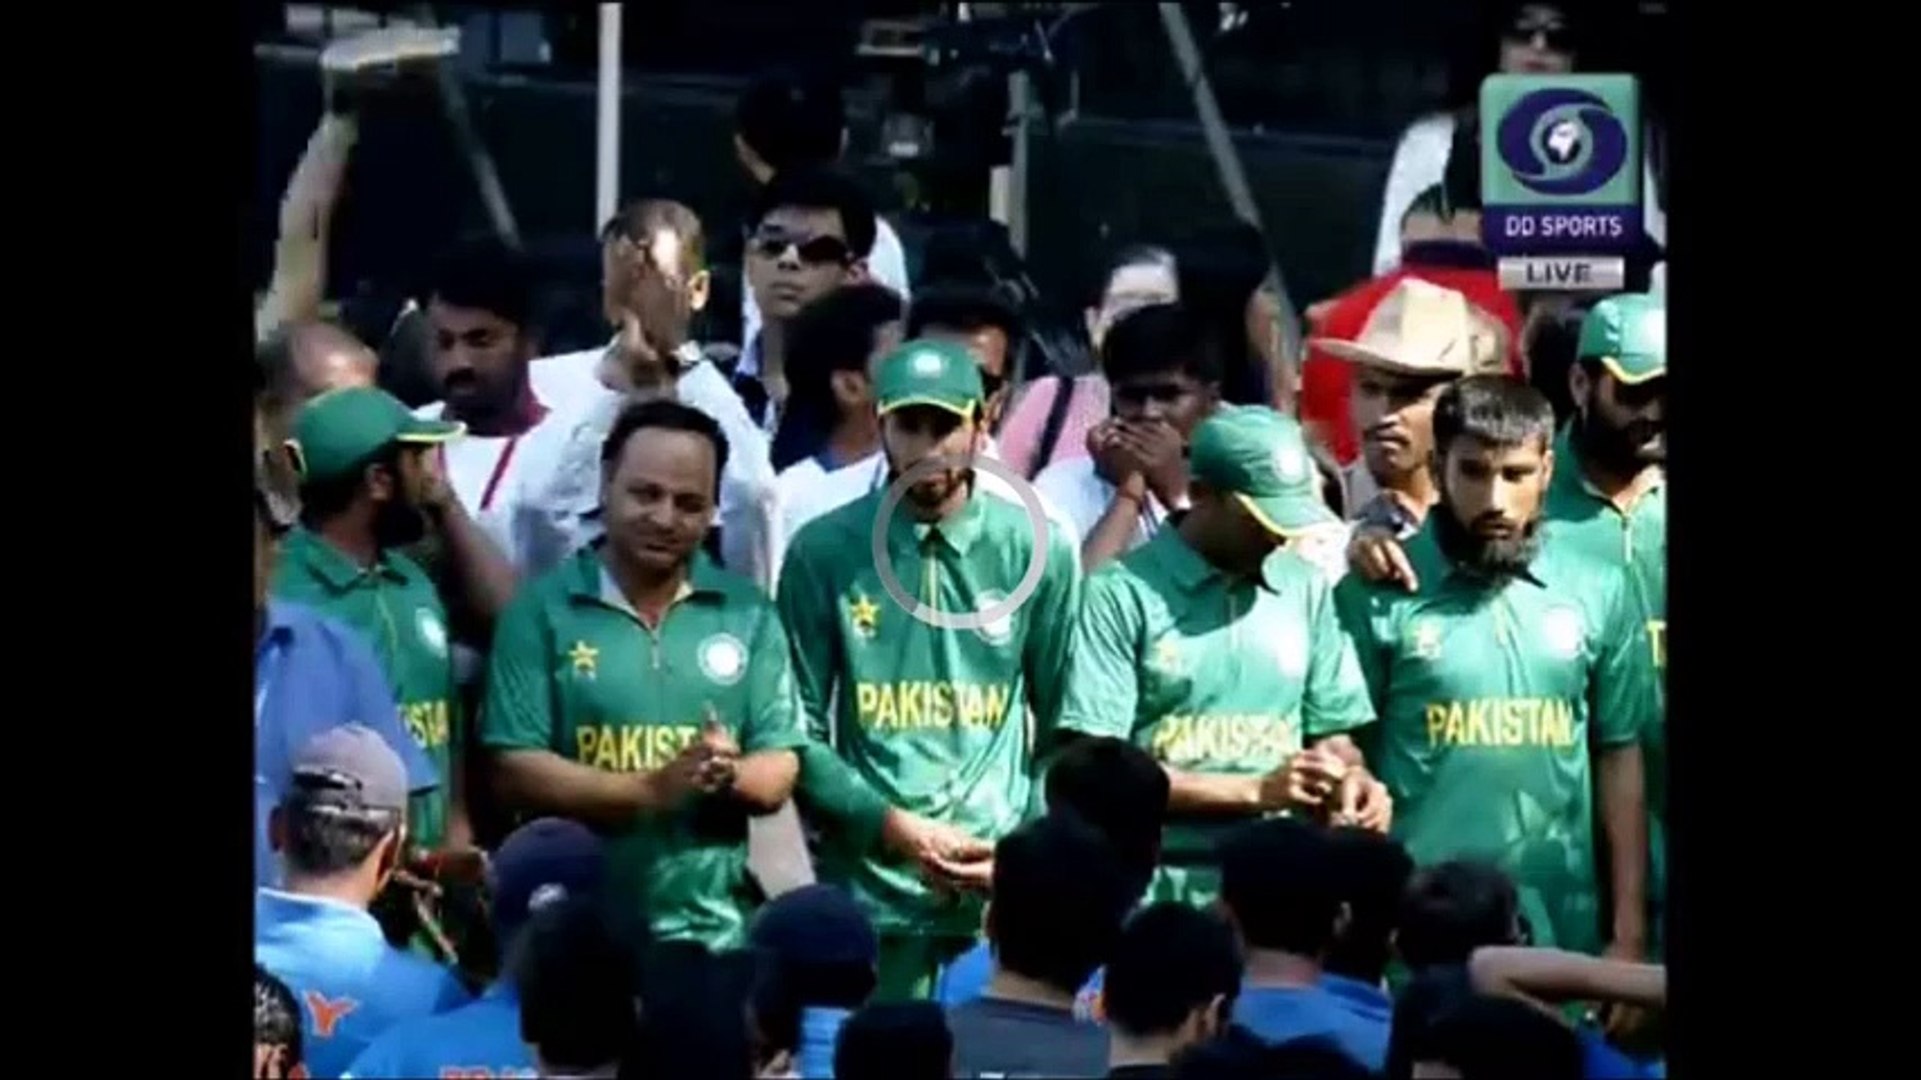 India Vs Pakistan World T20 Match for the Blind